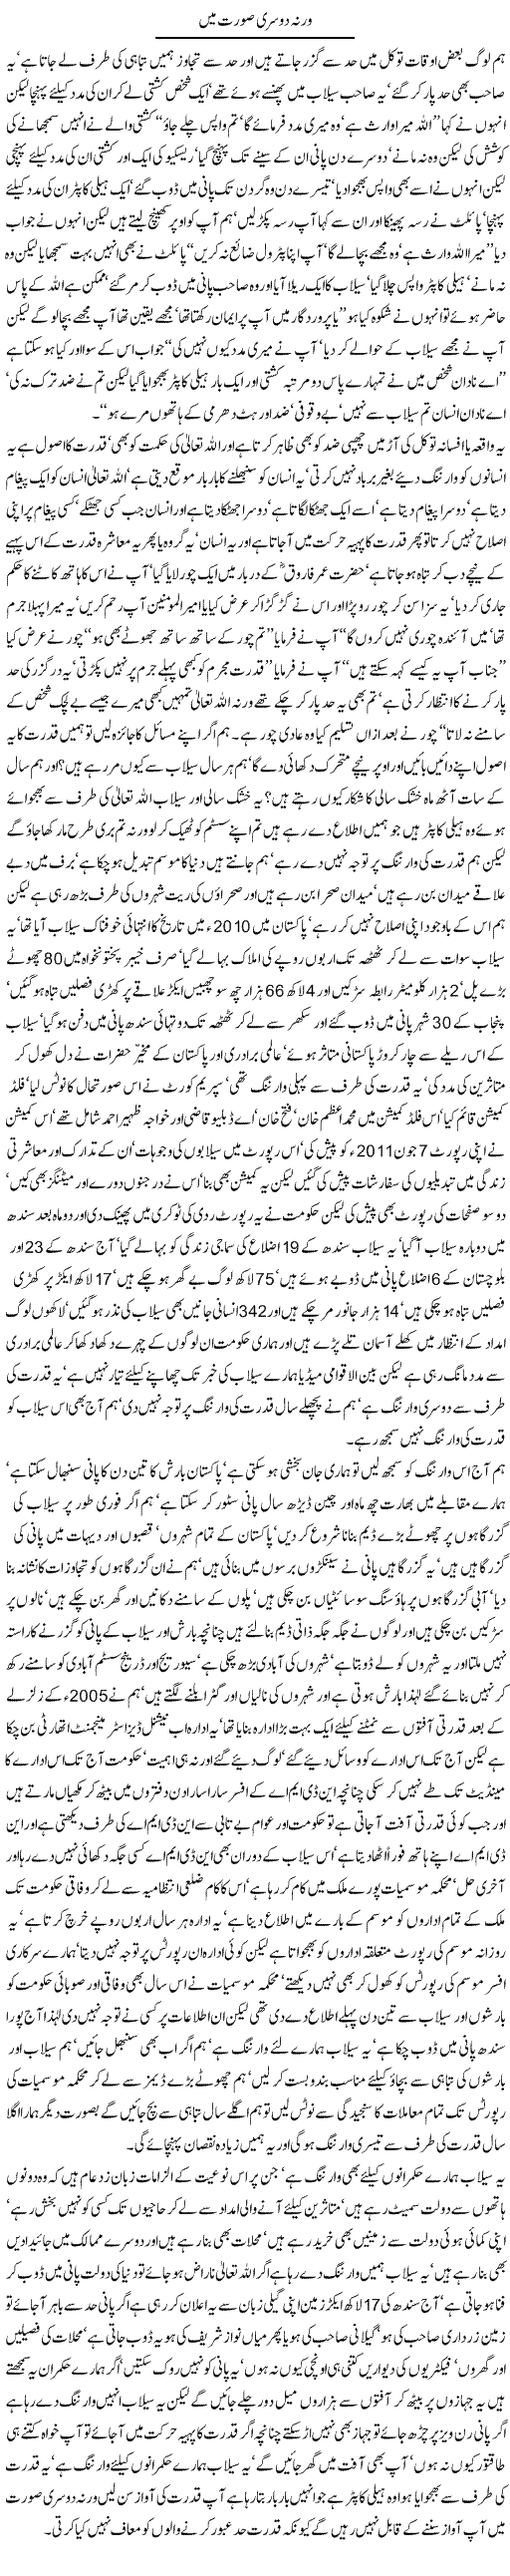 Floods In Pakistan Express Column Javed Chaudhry 22 September 2011